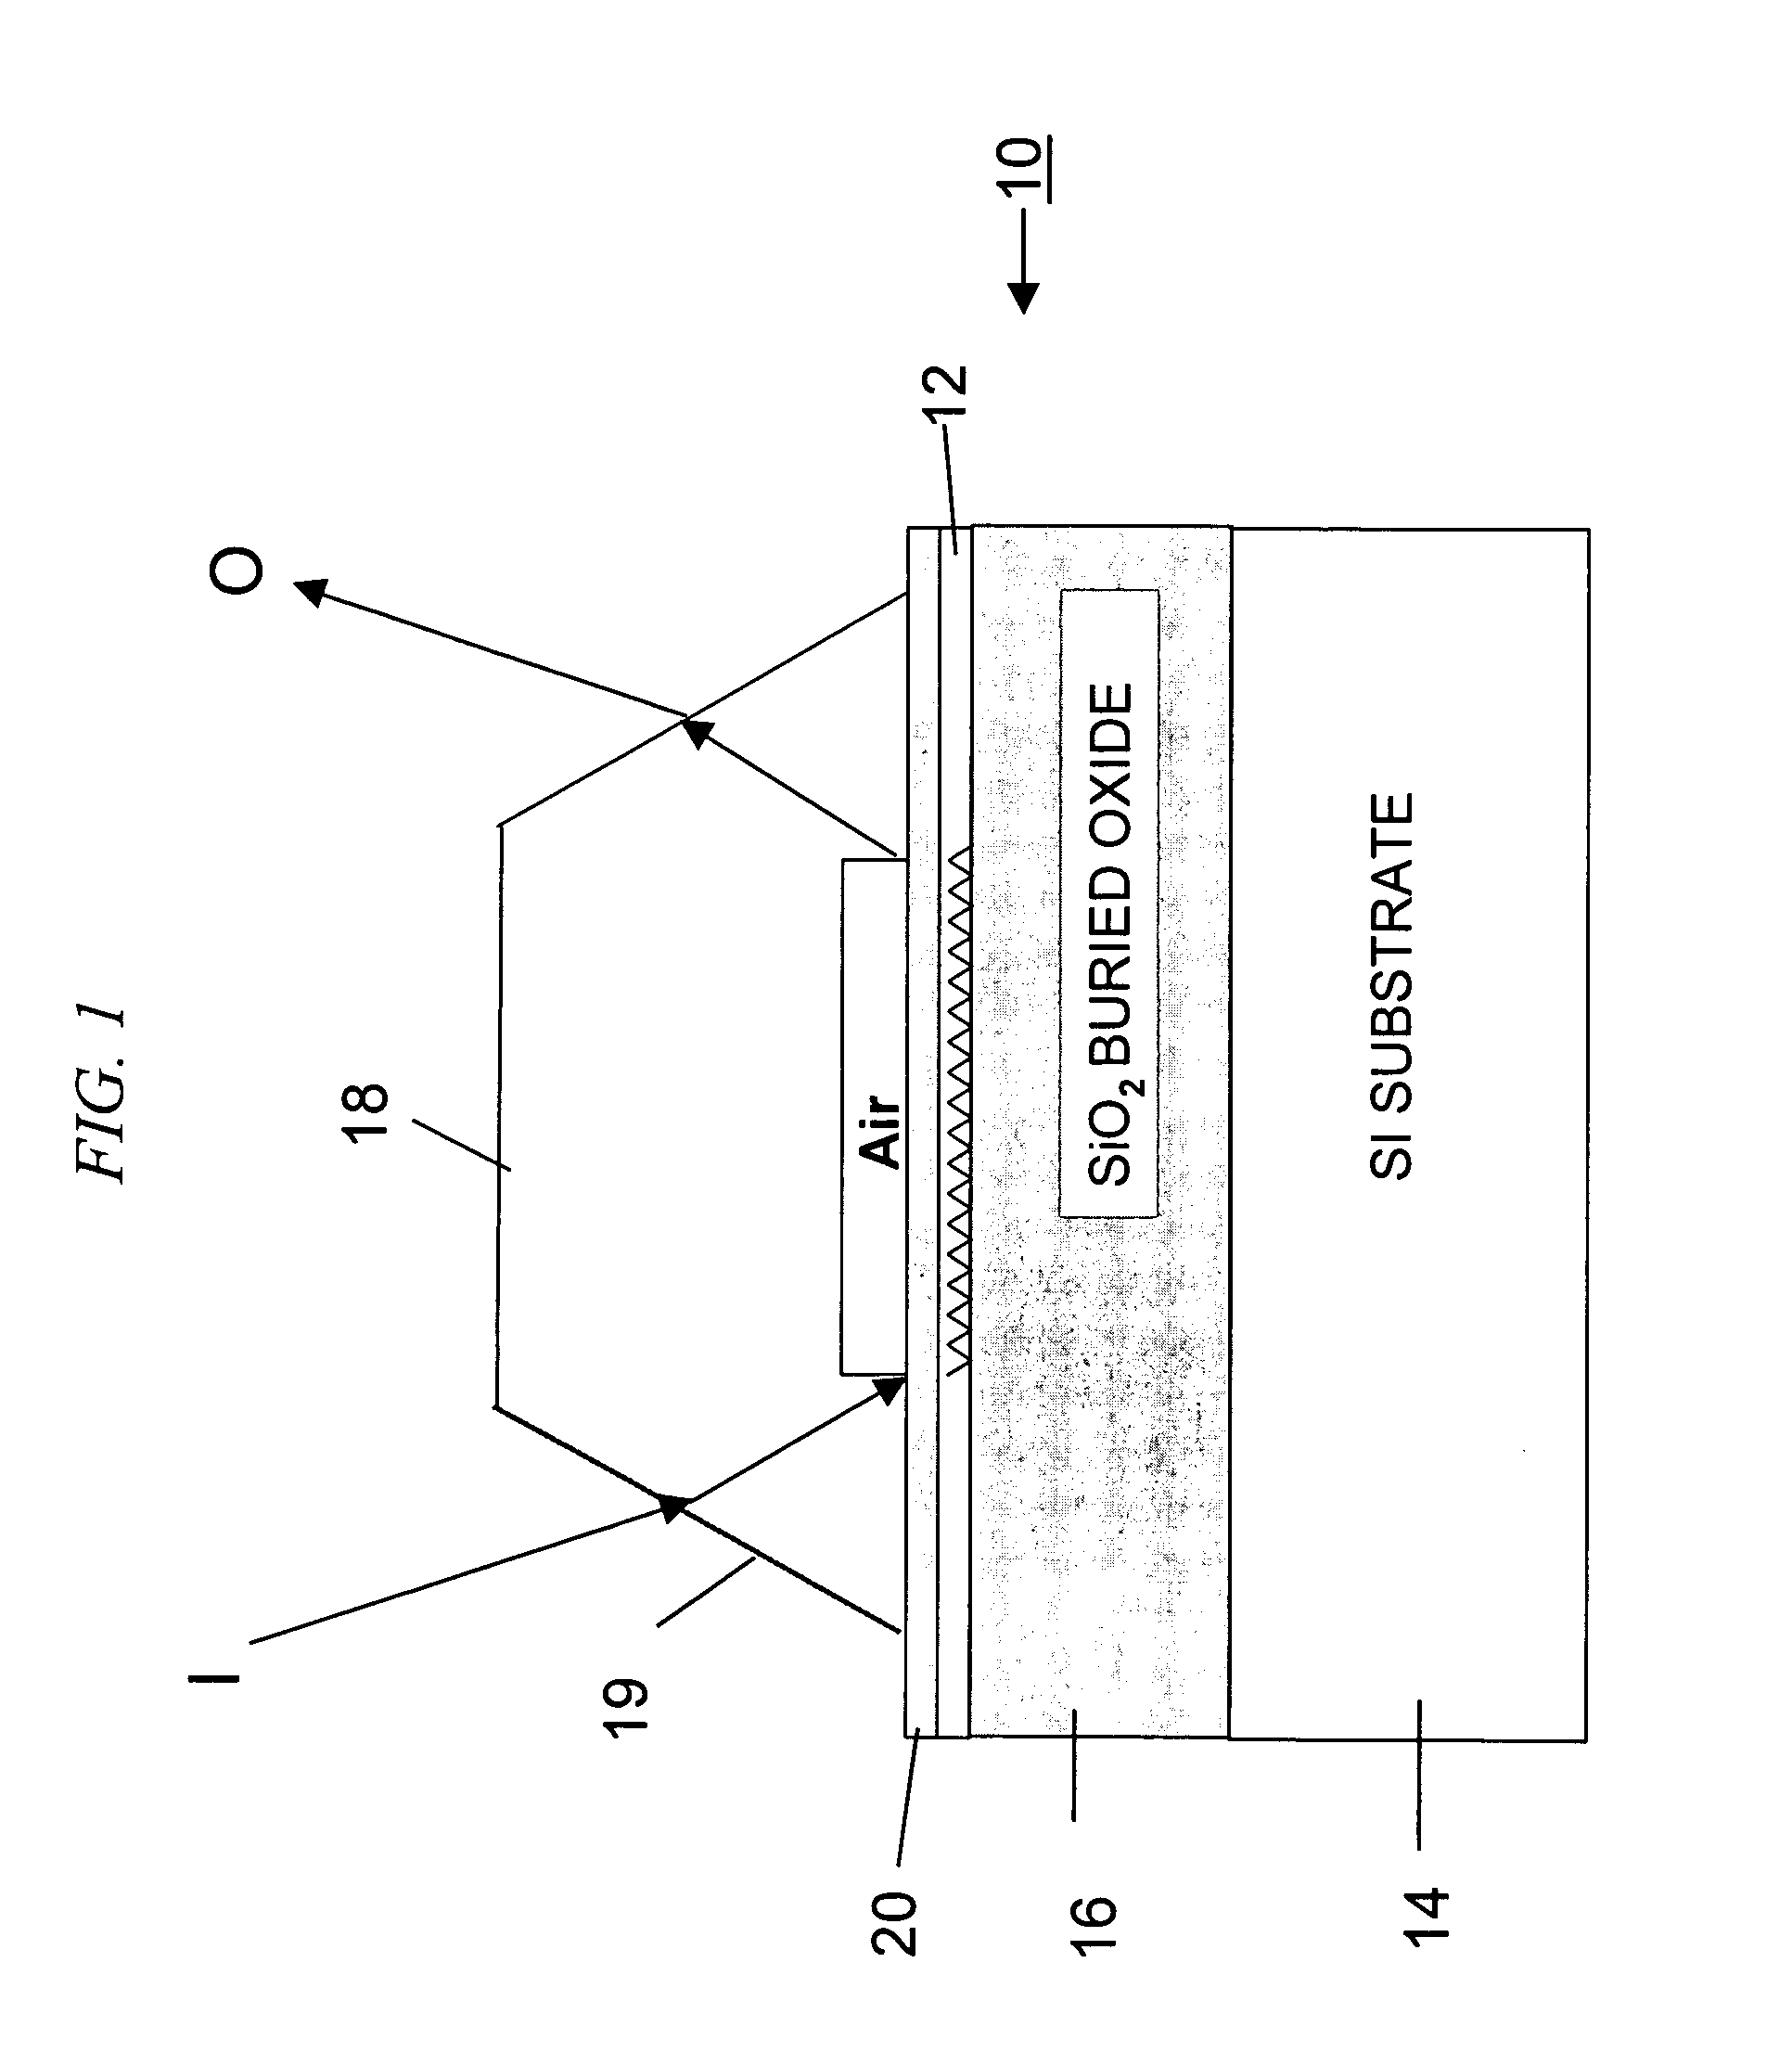 External grating structures for interfacing wavelength-division-multiplexed optical sources with thin optical waveguides